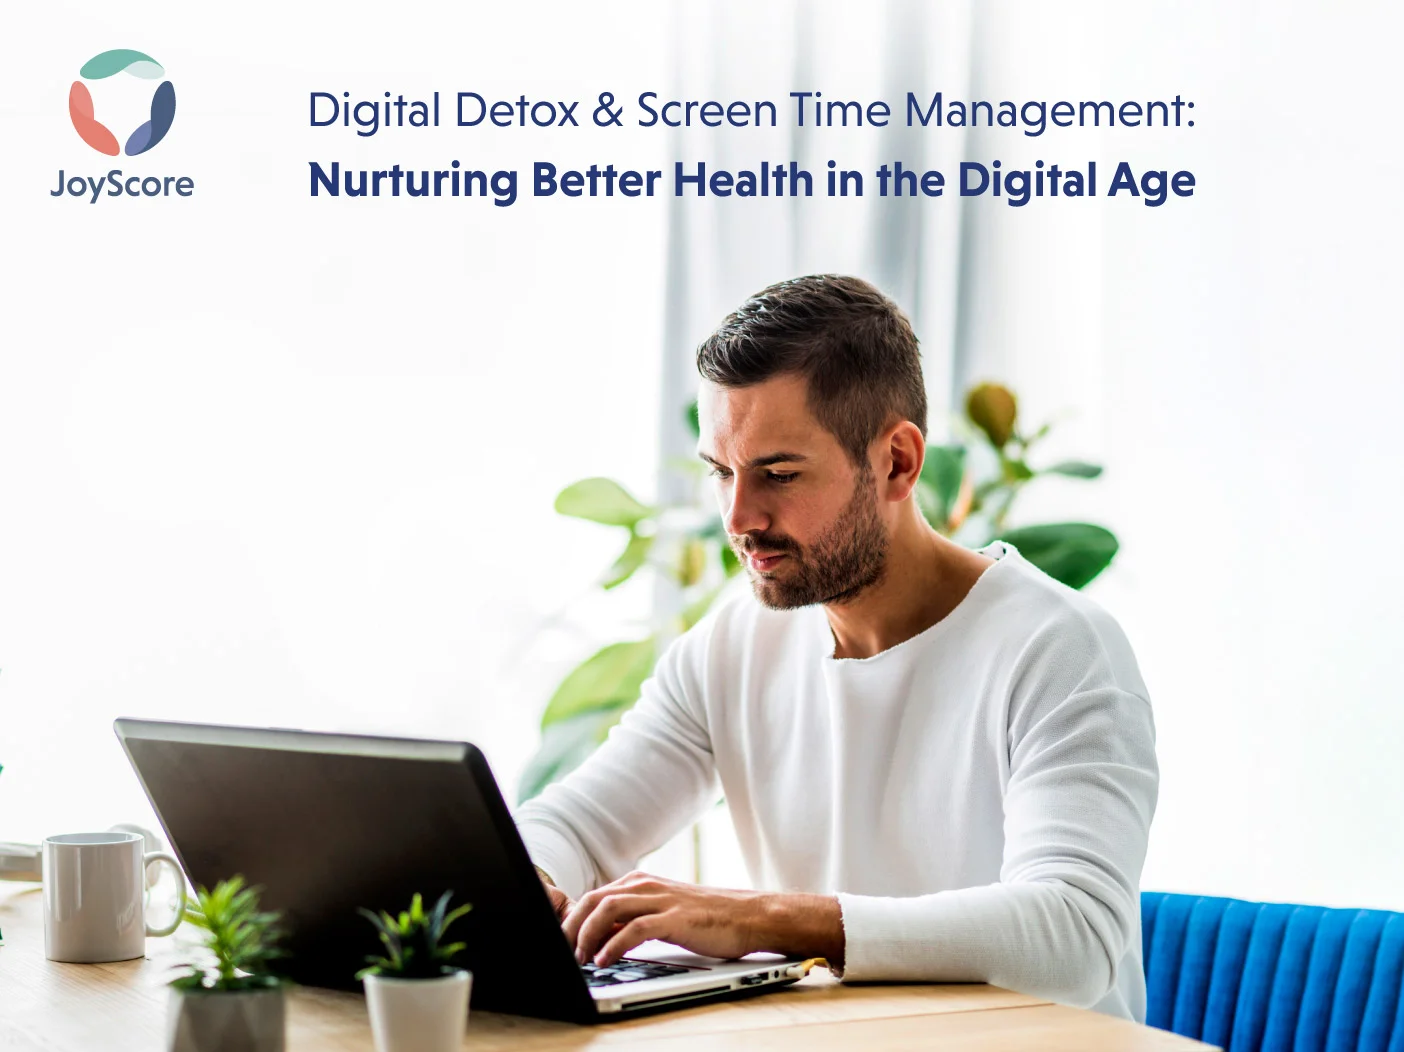 Digital Detox And Screen Time Management: Nurturing Better Health In The Digital Age